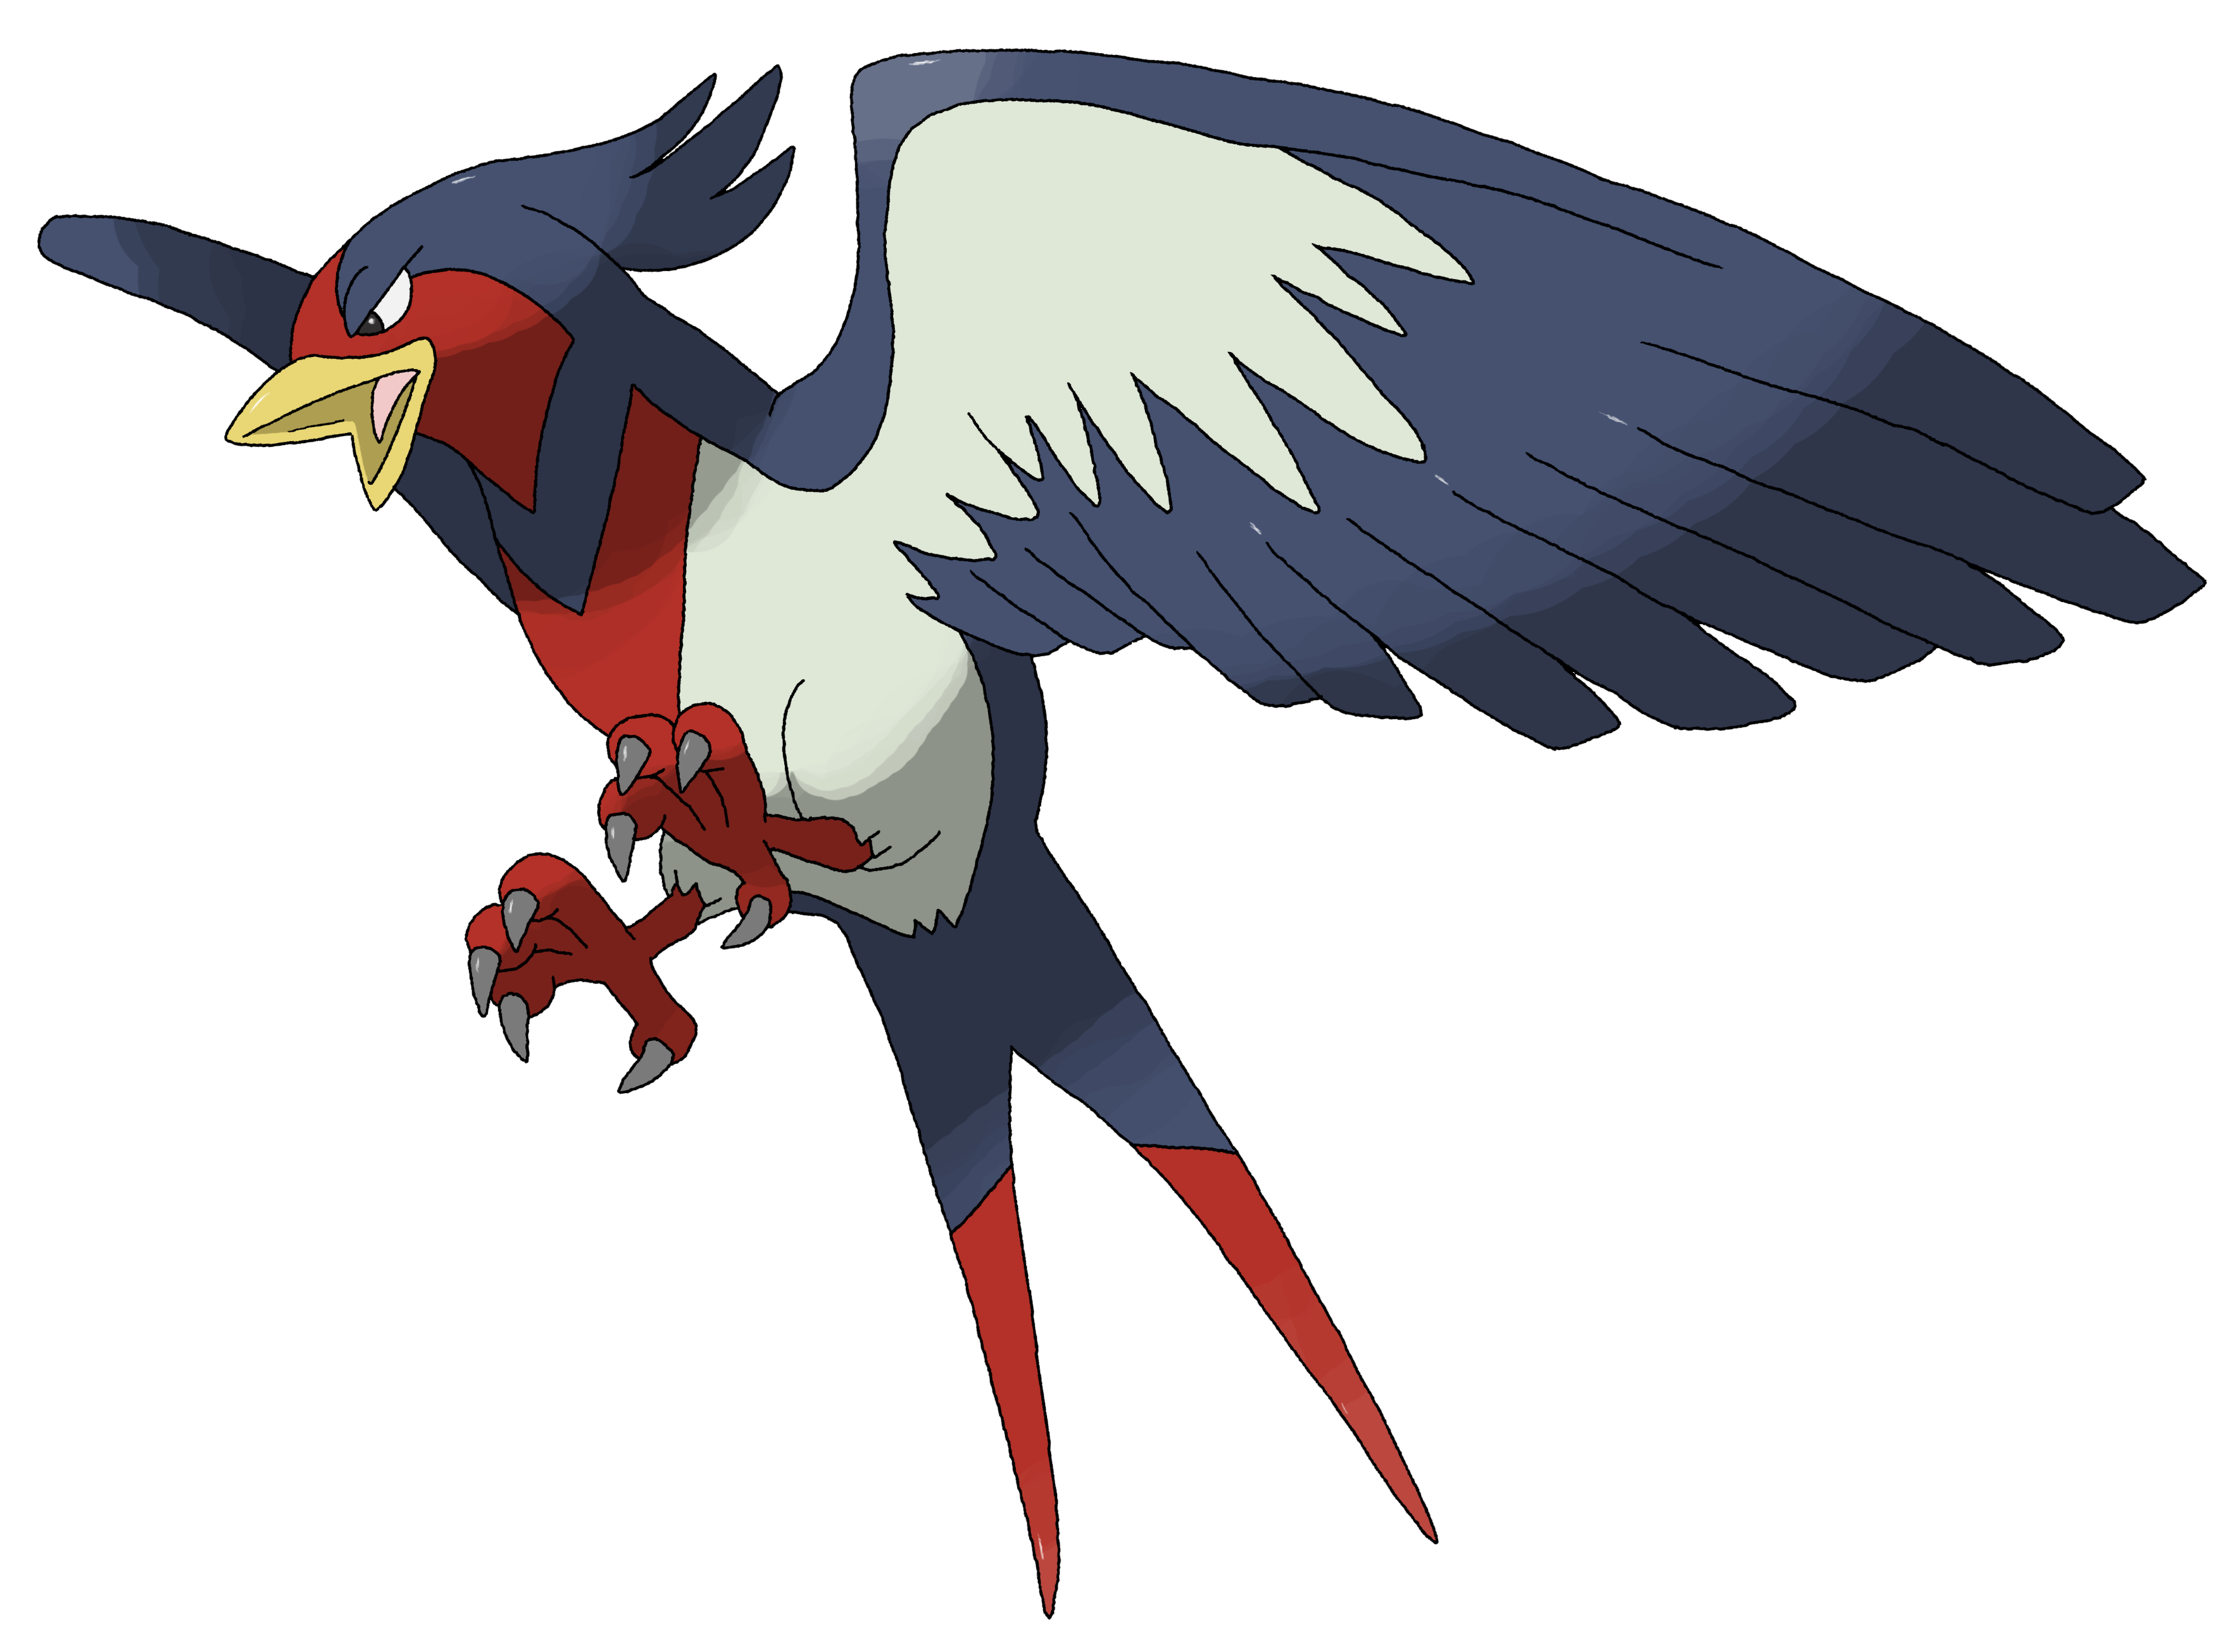 Swellow by cid fox-dcm9qx9.png